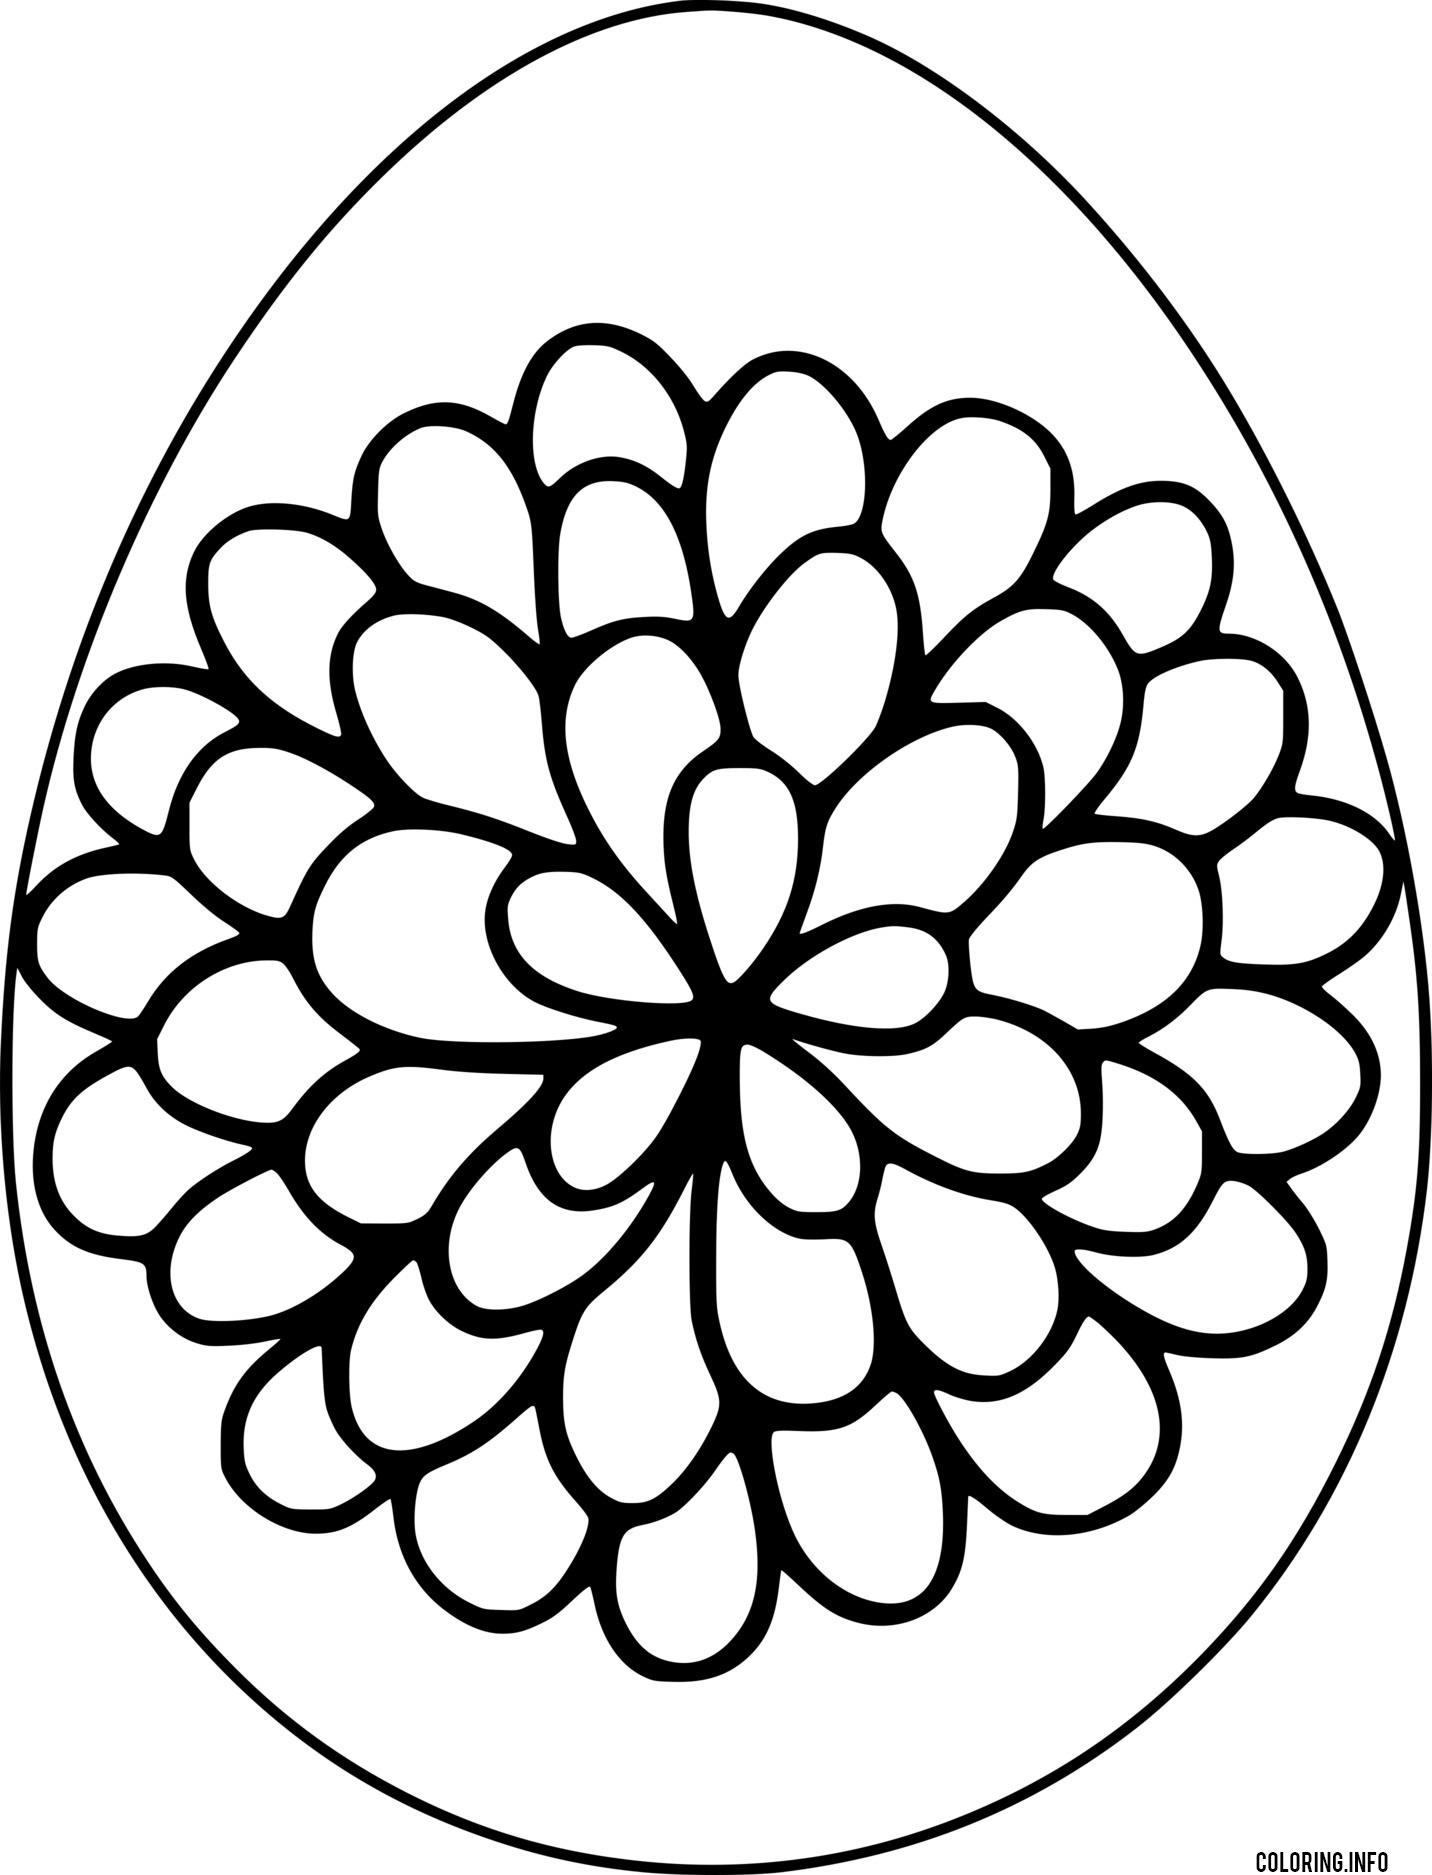 Easter Egg With Big Flower Pattern coloring